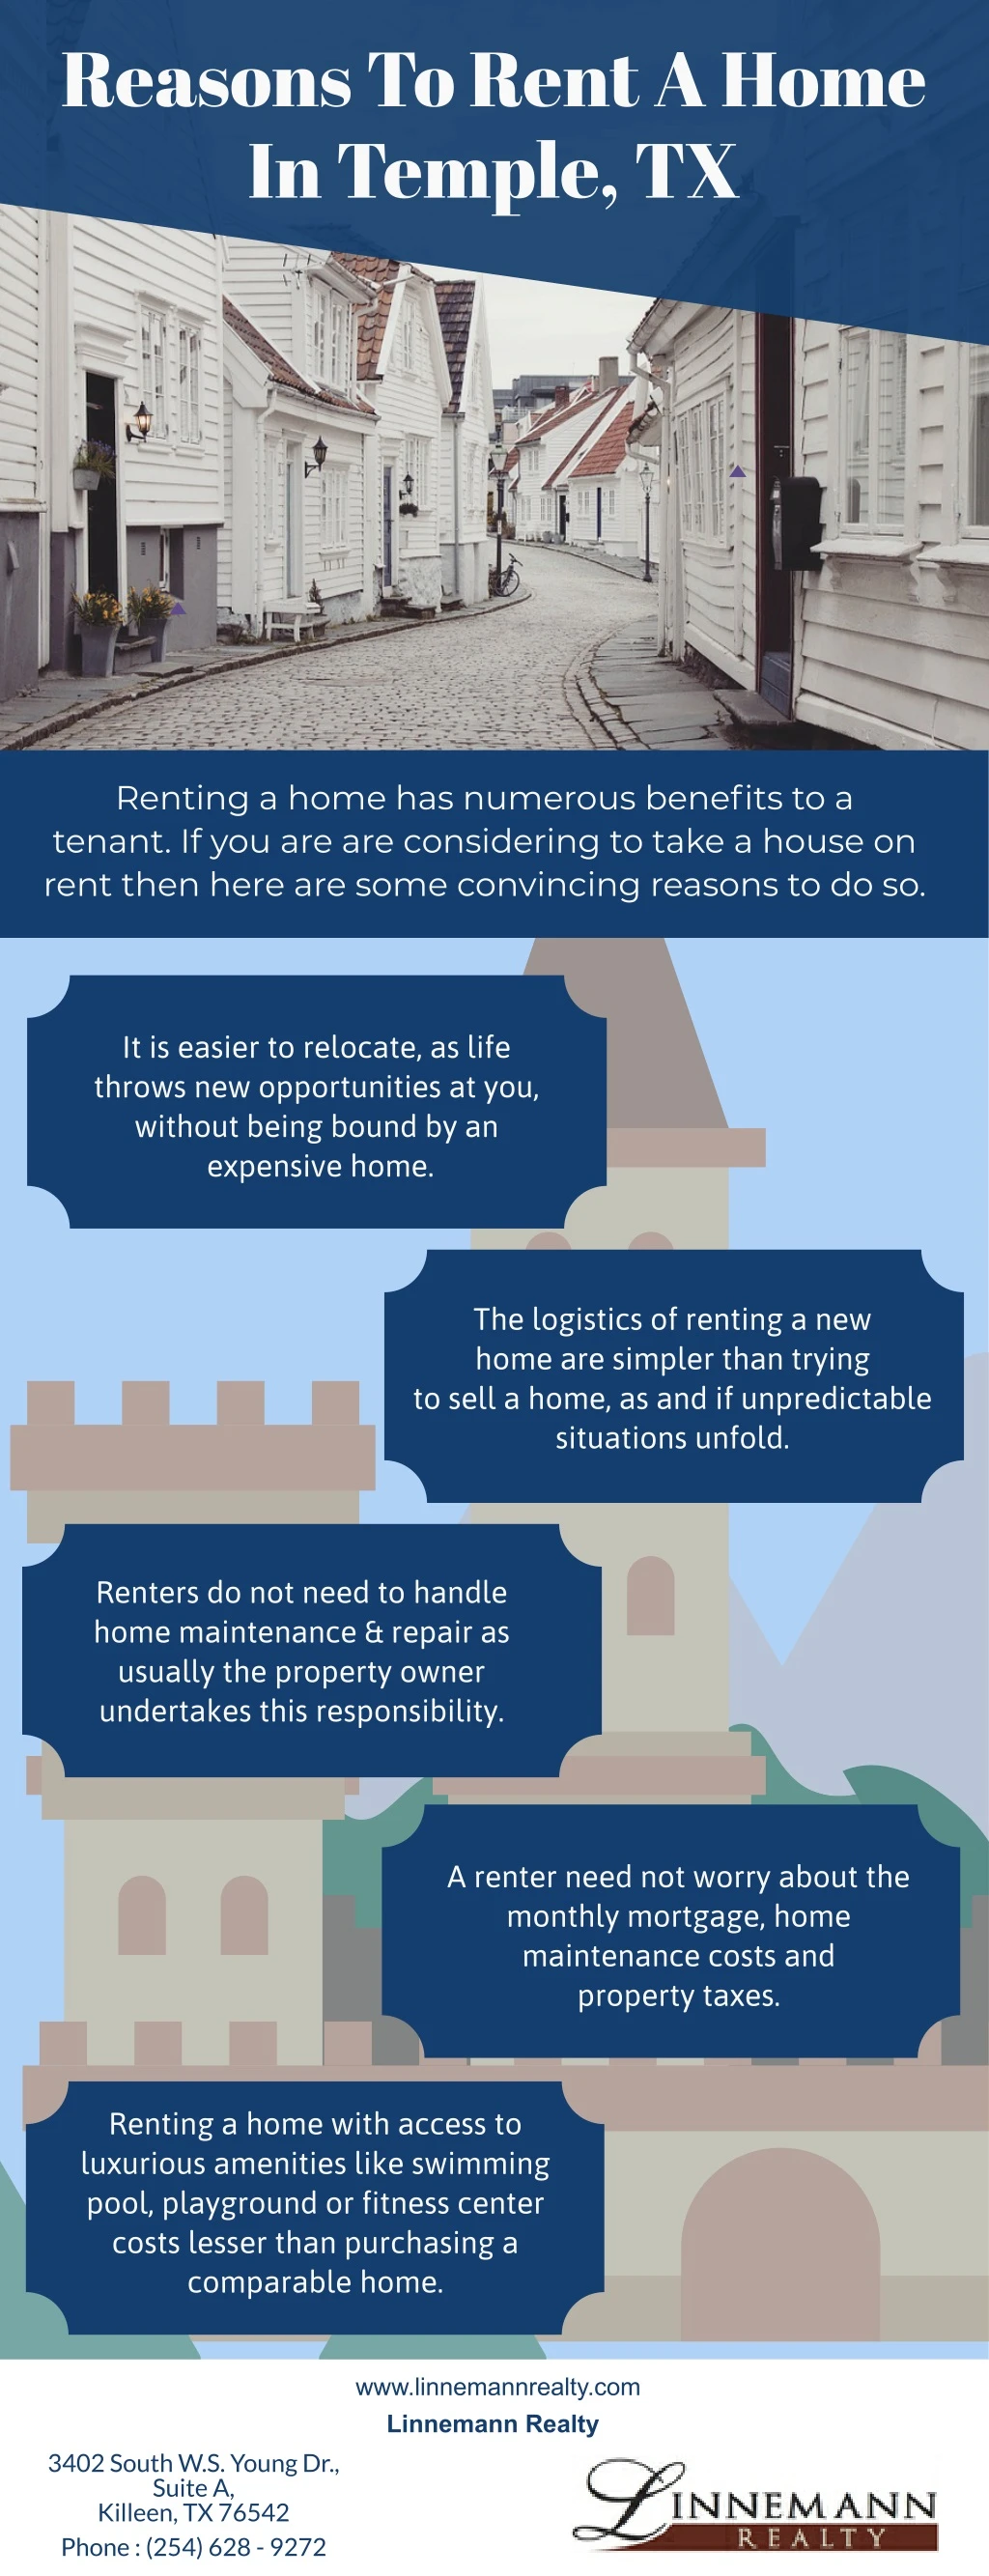 reasons to rent a home in temple tx